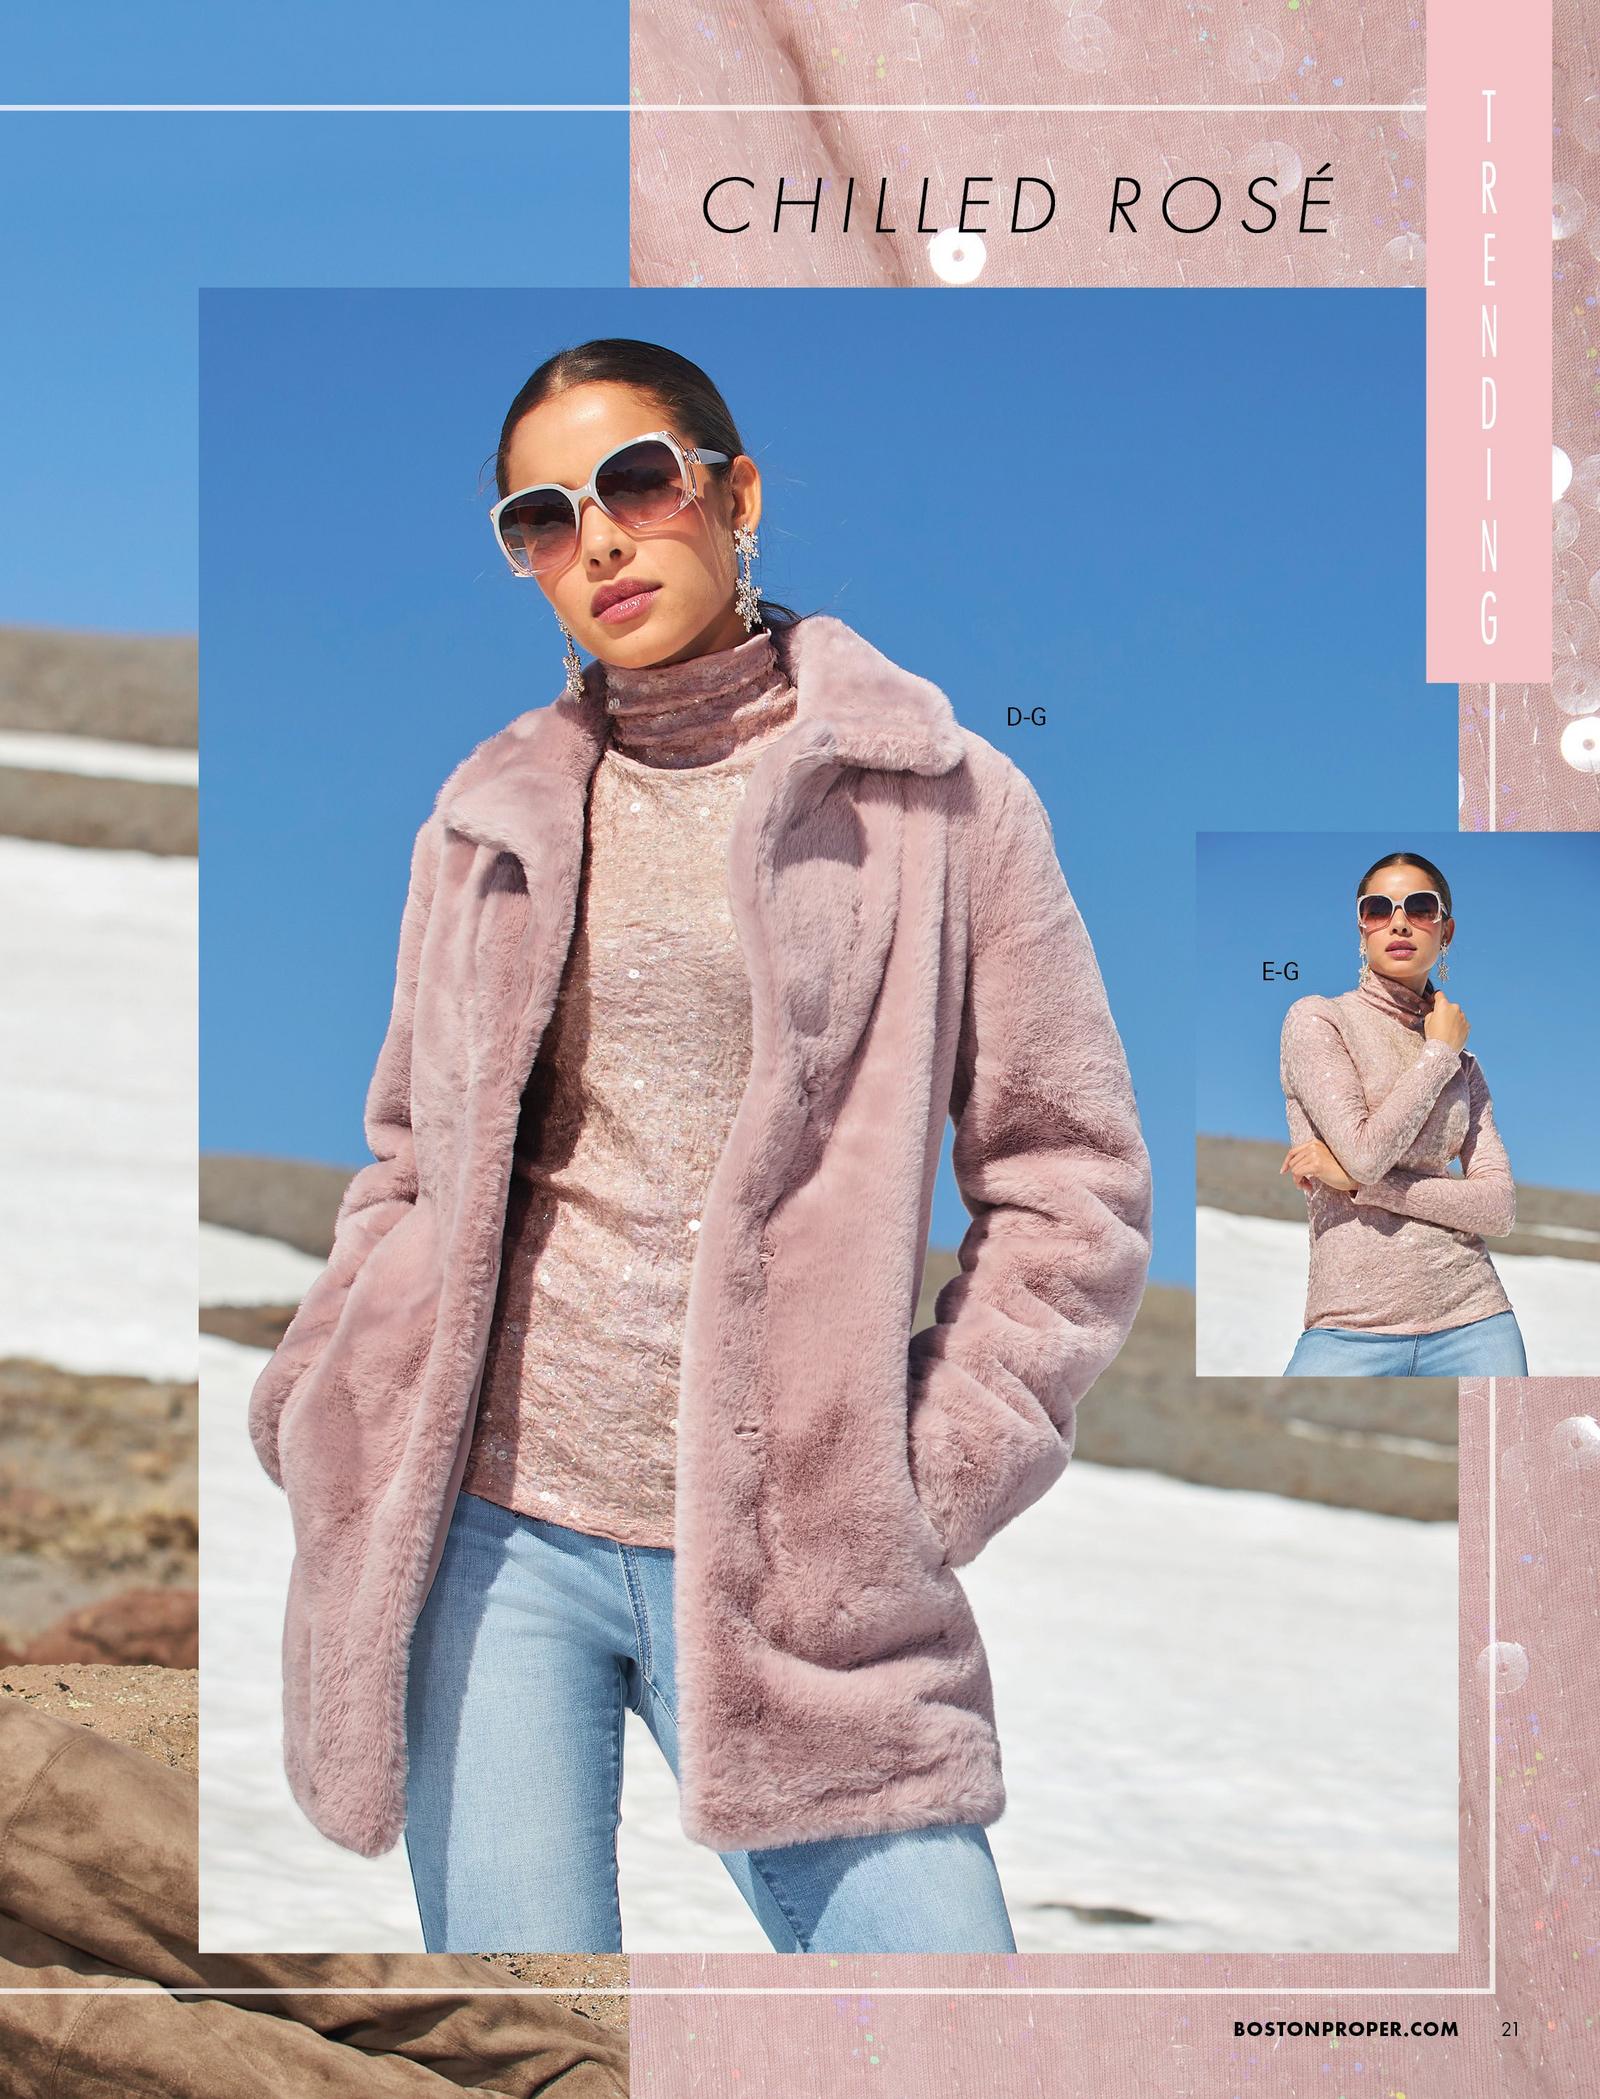 left model wearing a mauve faux-mink coat, mauve sequin long-sleeve turtleneck top, snowflake earrings, and light wash jeans. right model wearing a mauve sequin long-sleeve turtleneck top, snowflake earrings, and light wash jeans.